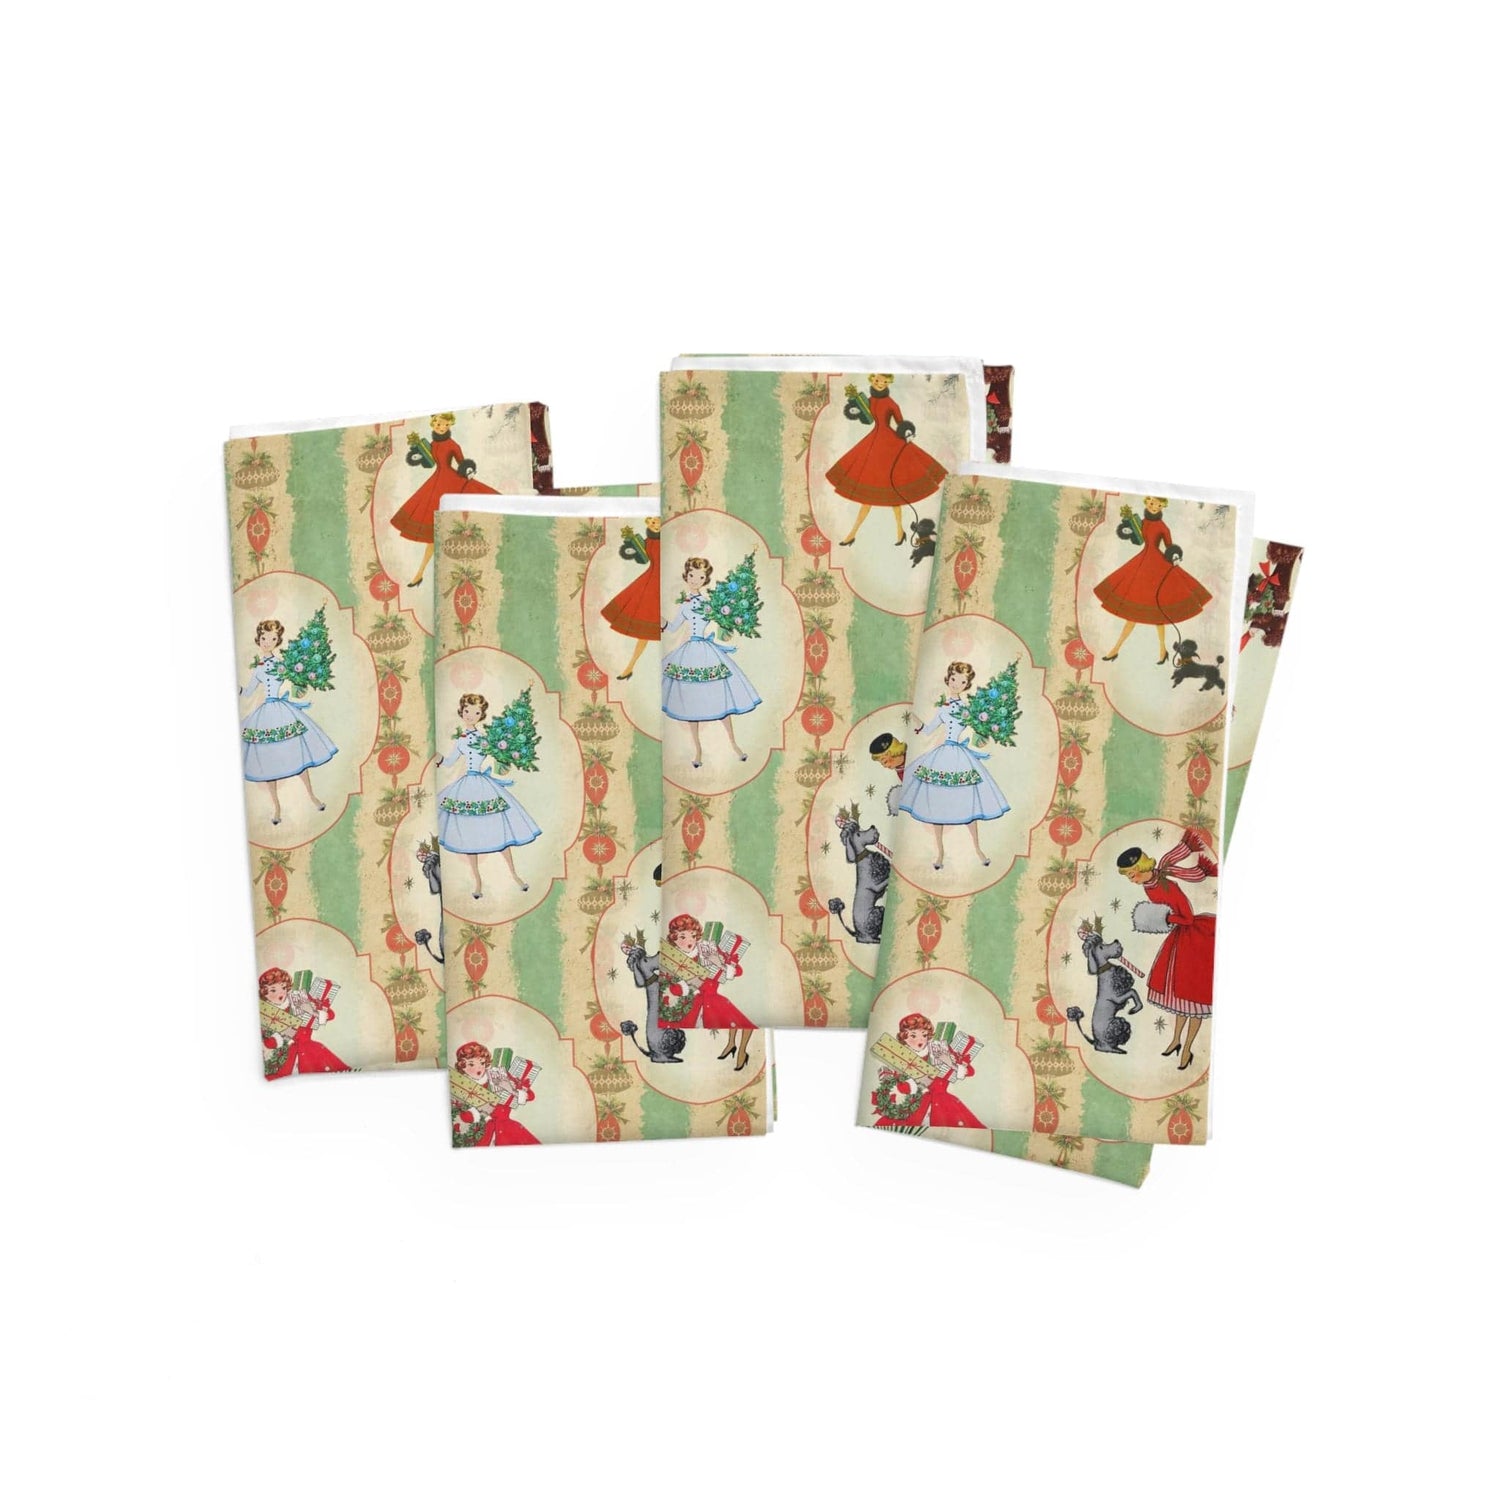 Kate McEnroe New York Set of 4 Vintage 1950s Christmas Napkins, Mid Century Modern Retro Green, Red, Women, Ladies, Housewives Holiday Table Linens - 122681223Napkins29690093392553166920